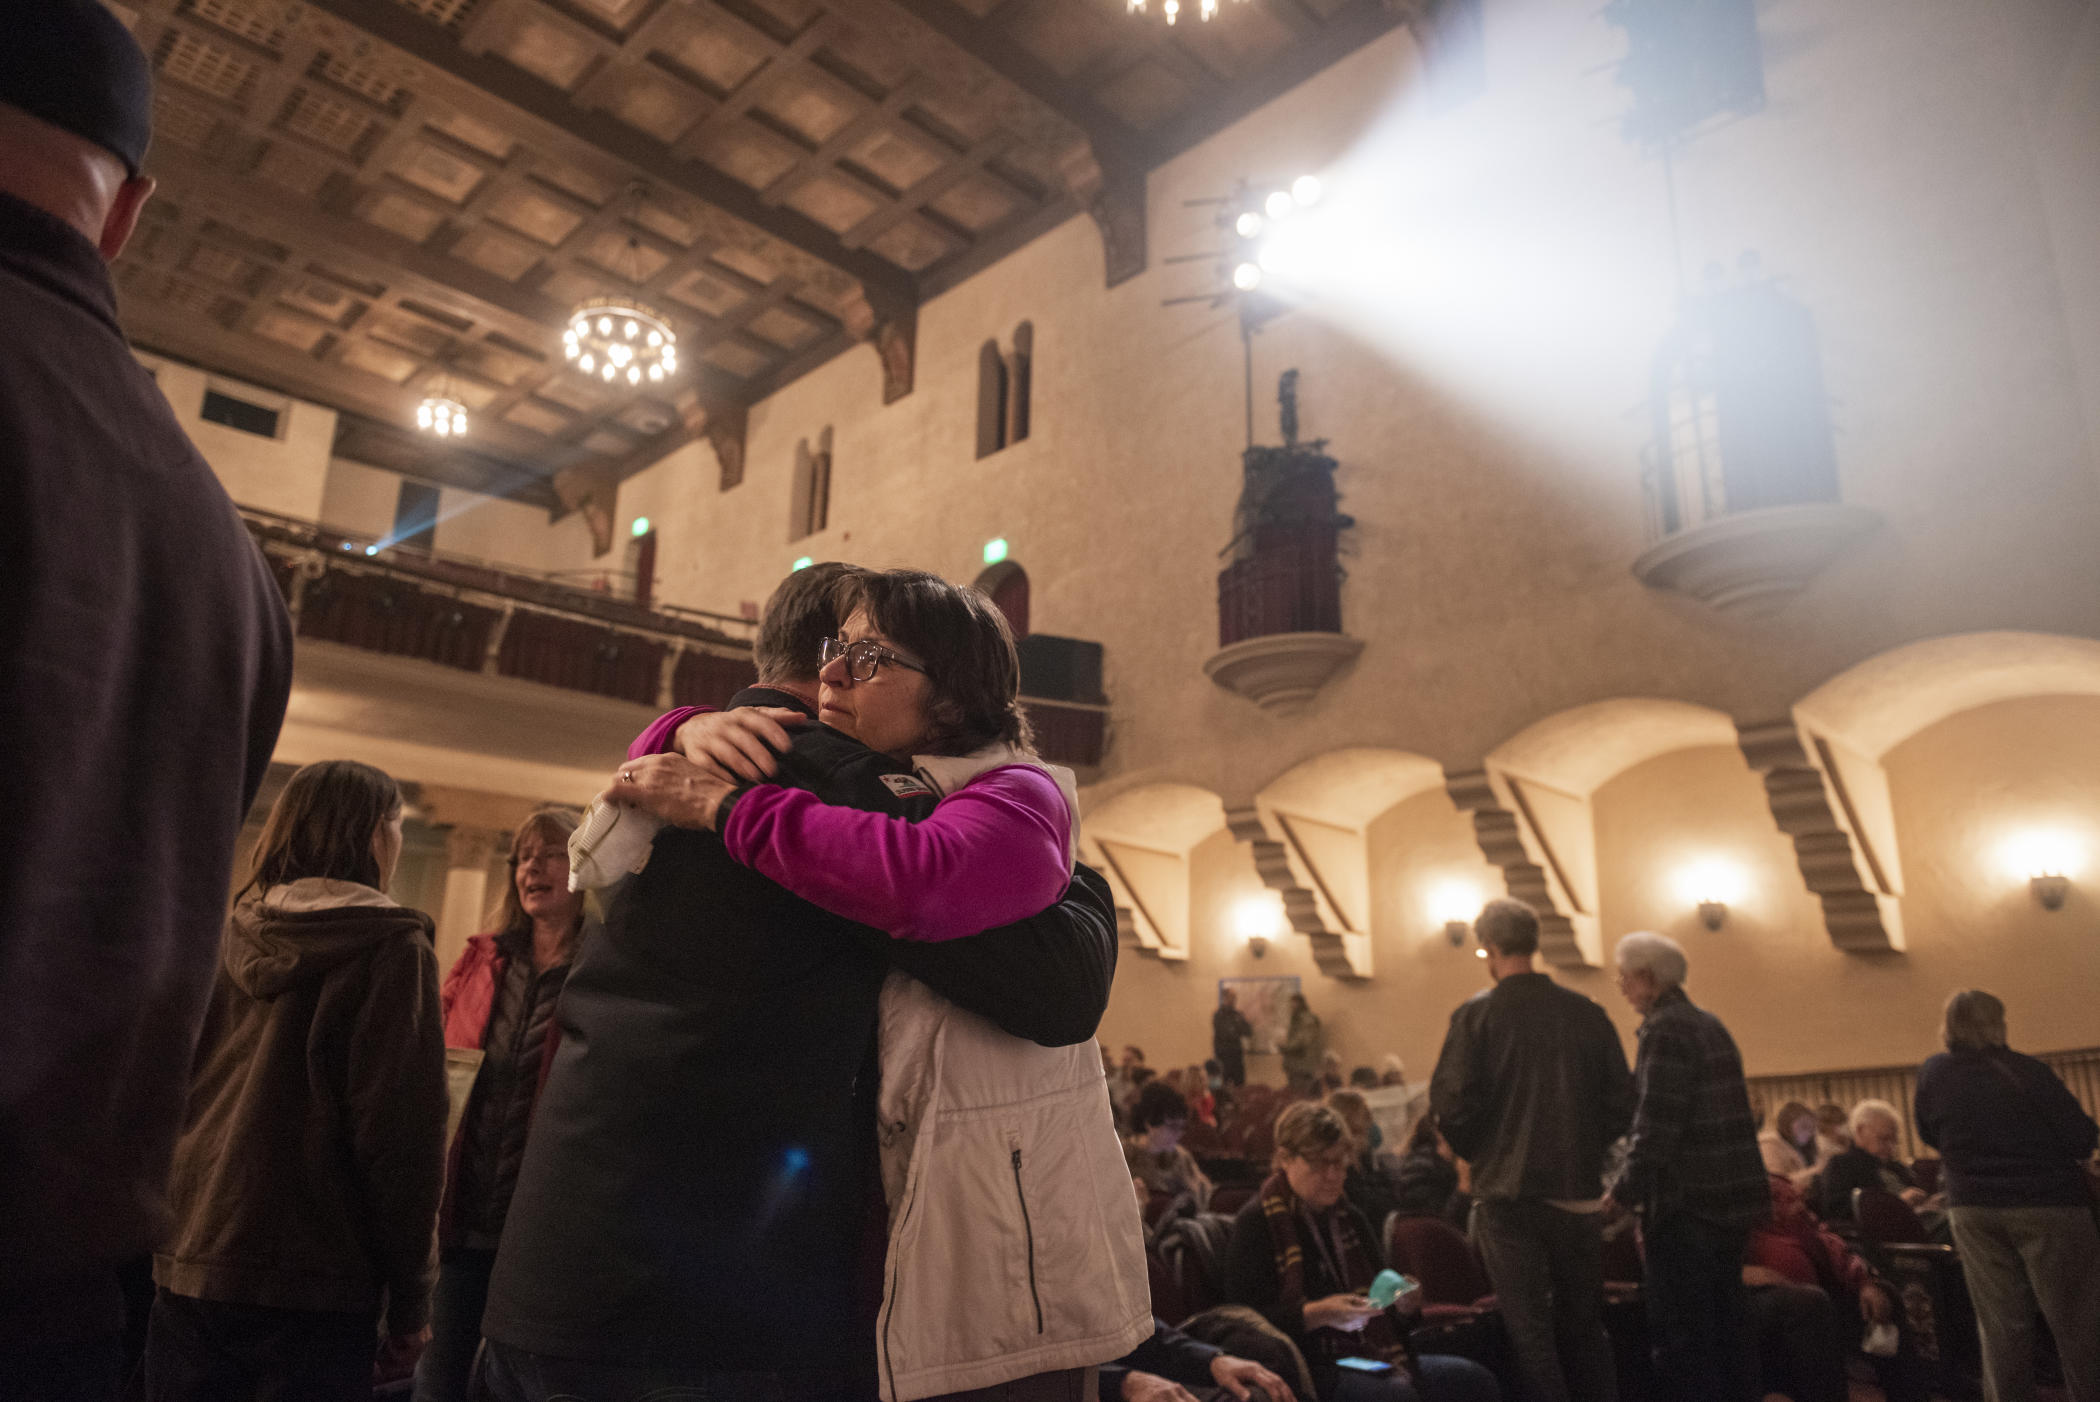 President Gayle Hutchinson shares a somber hug with someone as light shines through smoky air inside of Laxson Auditorium at a Camp Fire meeting.